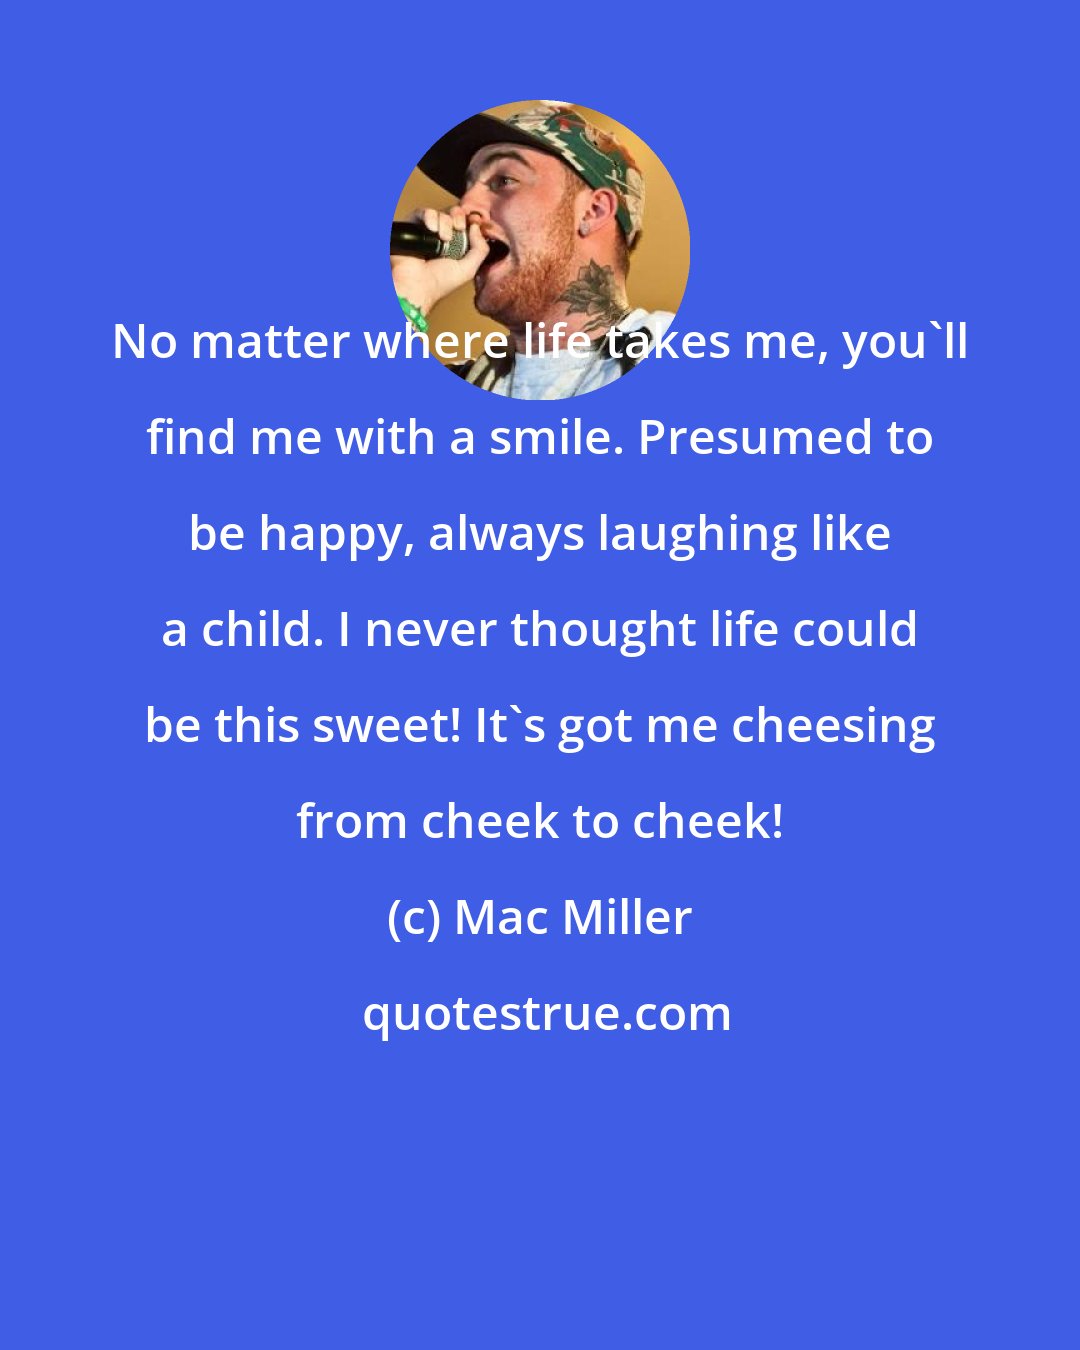 Mac Miller: No matter where life takes me, you'll find me with a smile. Presumed to be happy, always laughing like a child. I never thought life could be this sweet! It's got me cheesing from cheek to cheek!